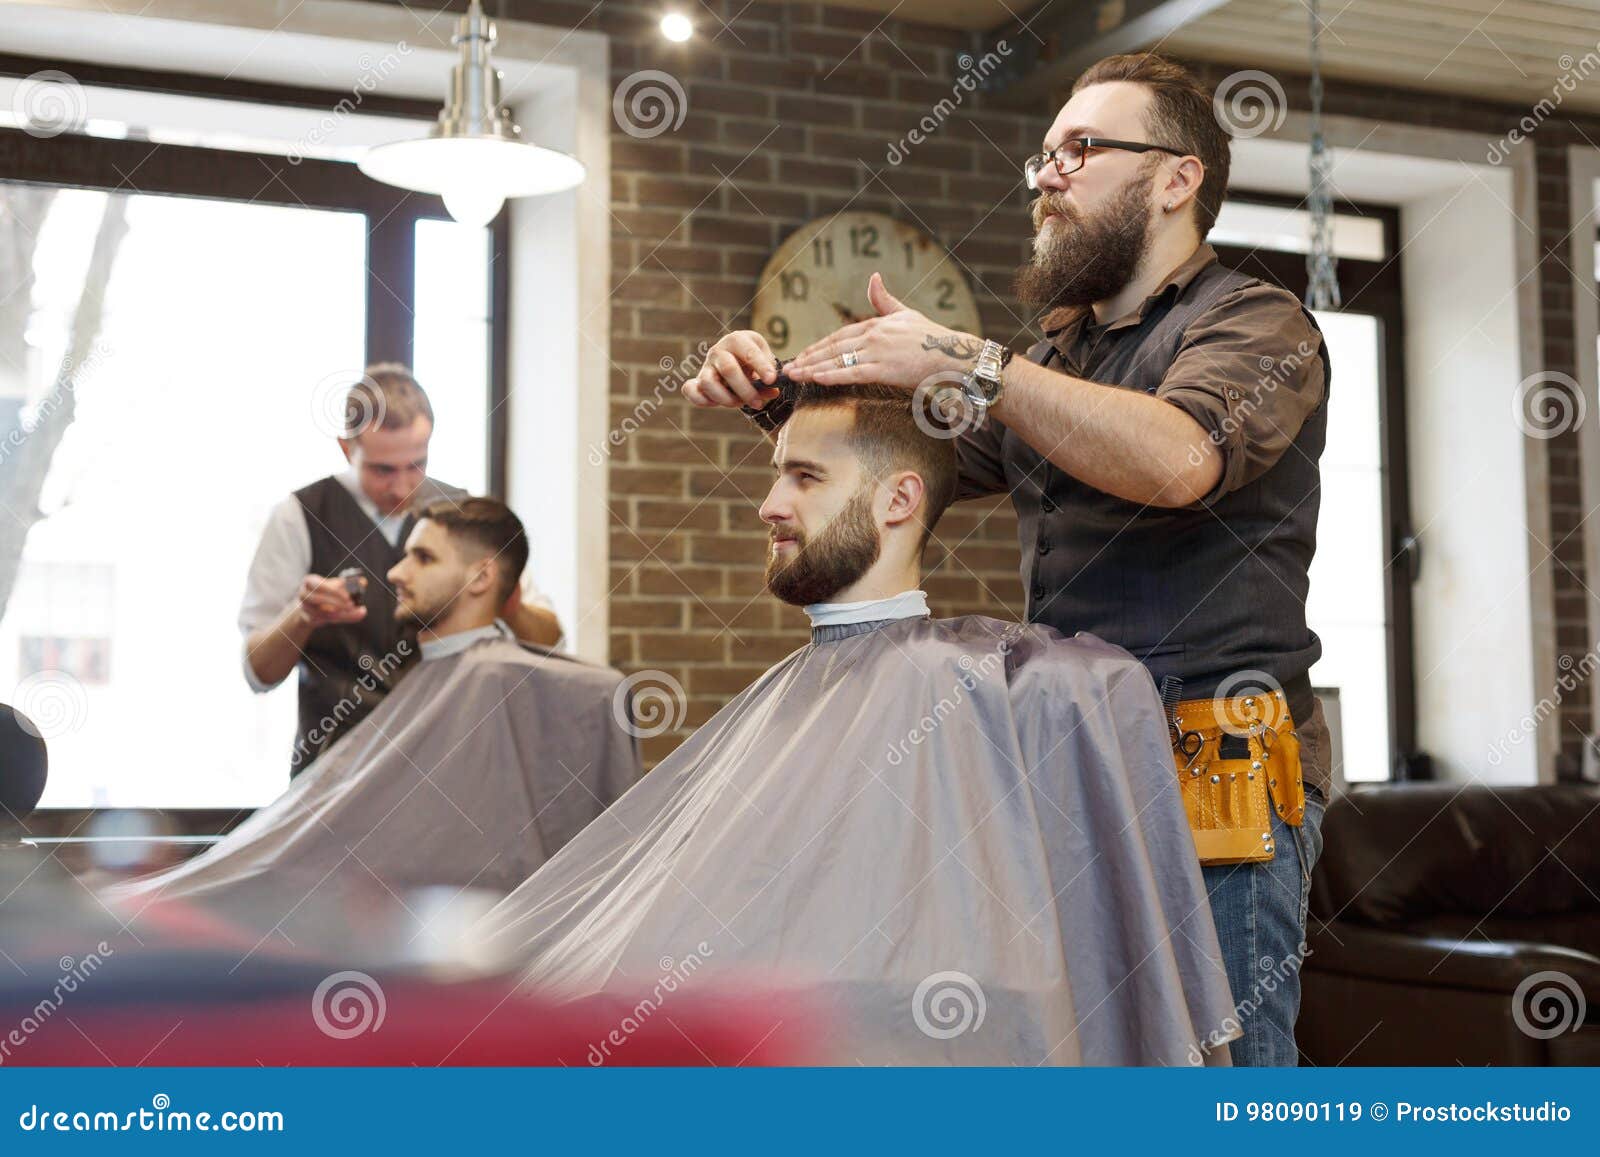 Man Getting Haircut By Hairstylist At Barbershop Stock Image